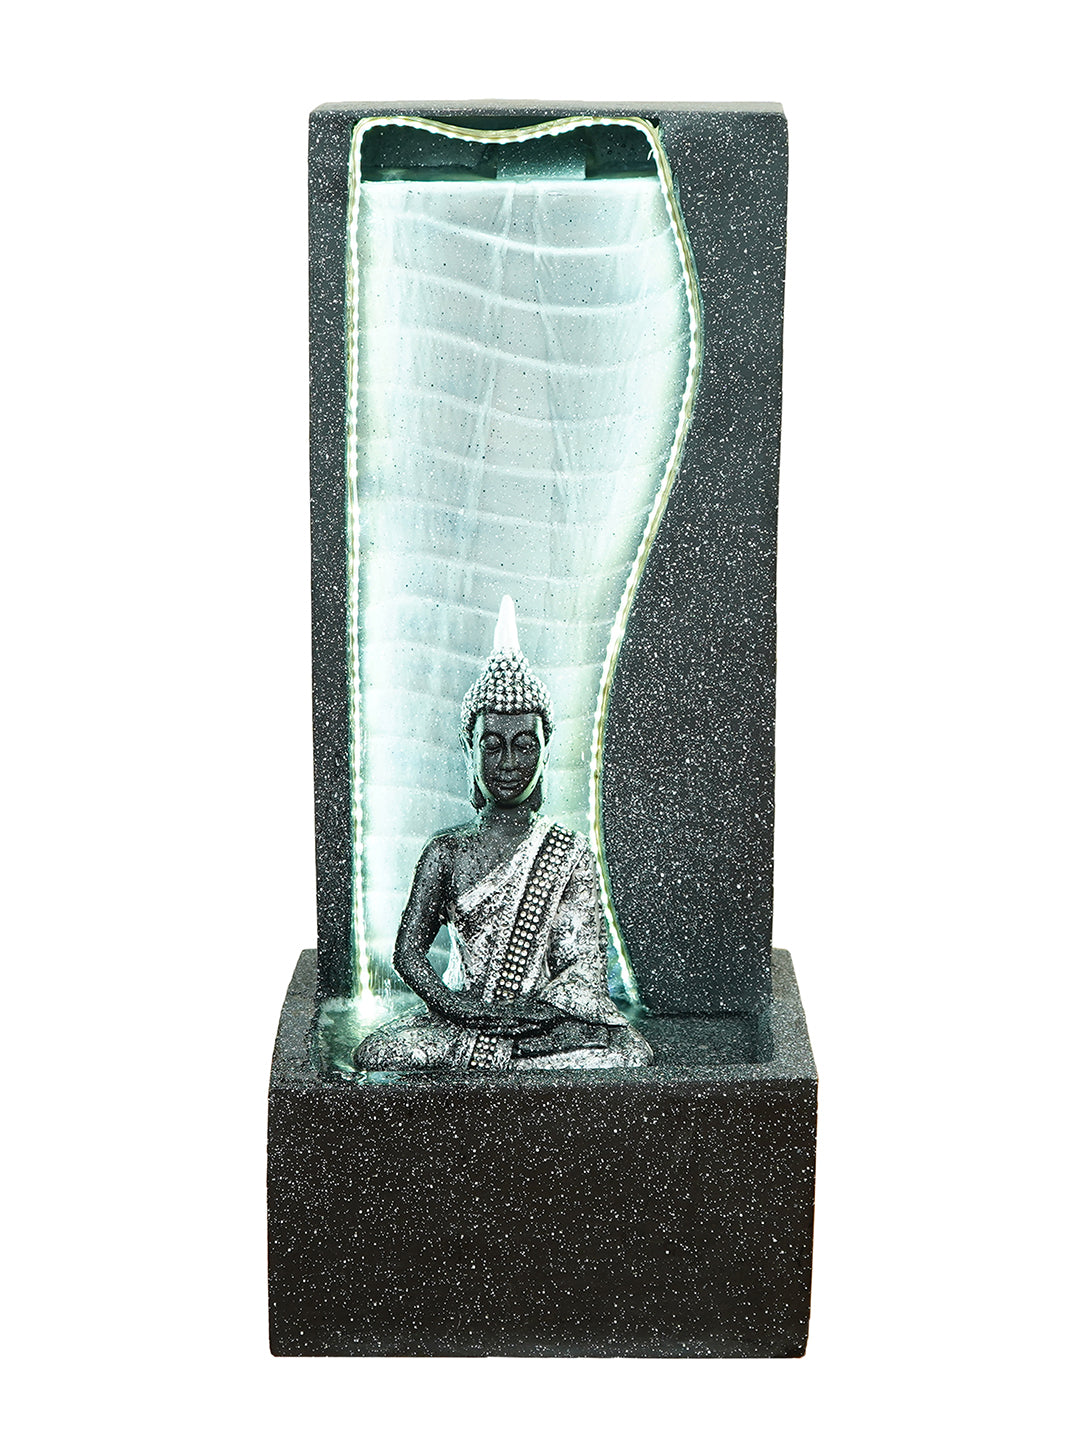 Polystone Grey Meditating Buddha Water Fountain with LED Light Effects and Water Pump for Home/Office Decoration